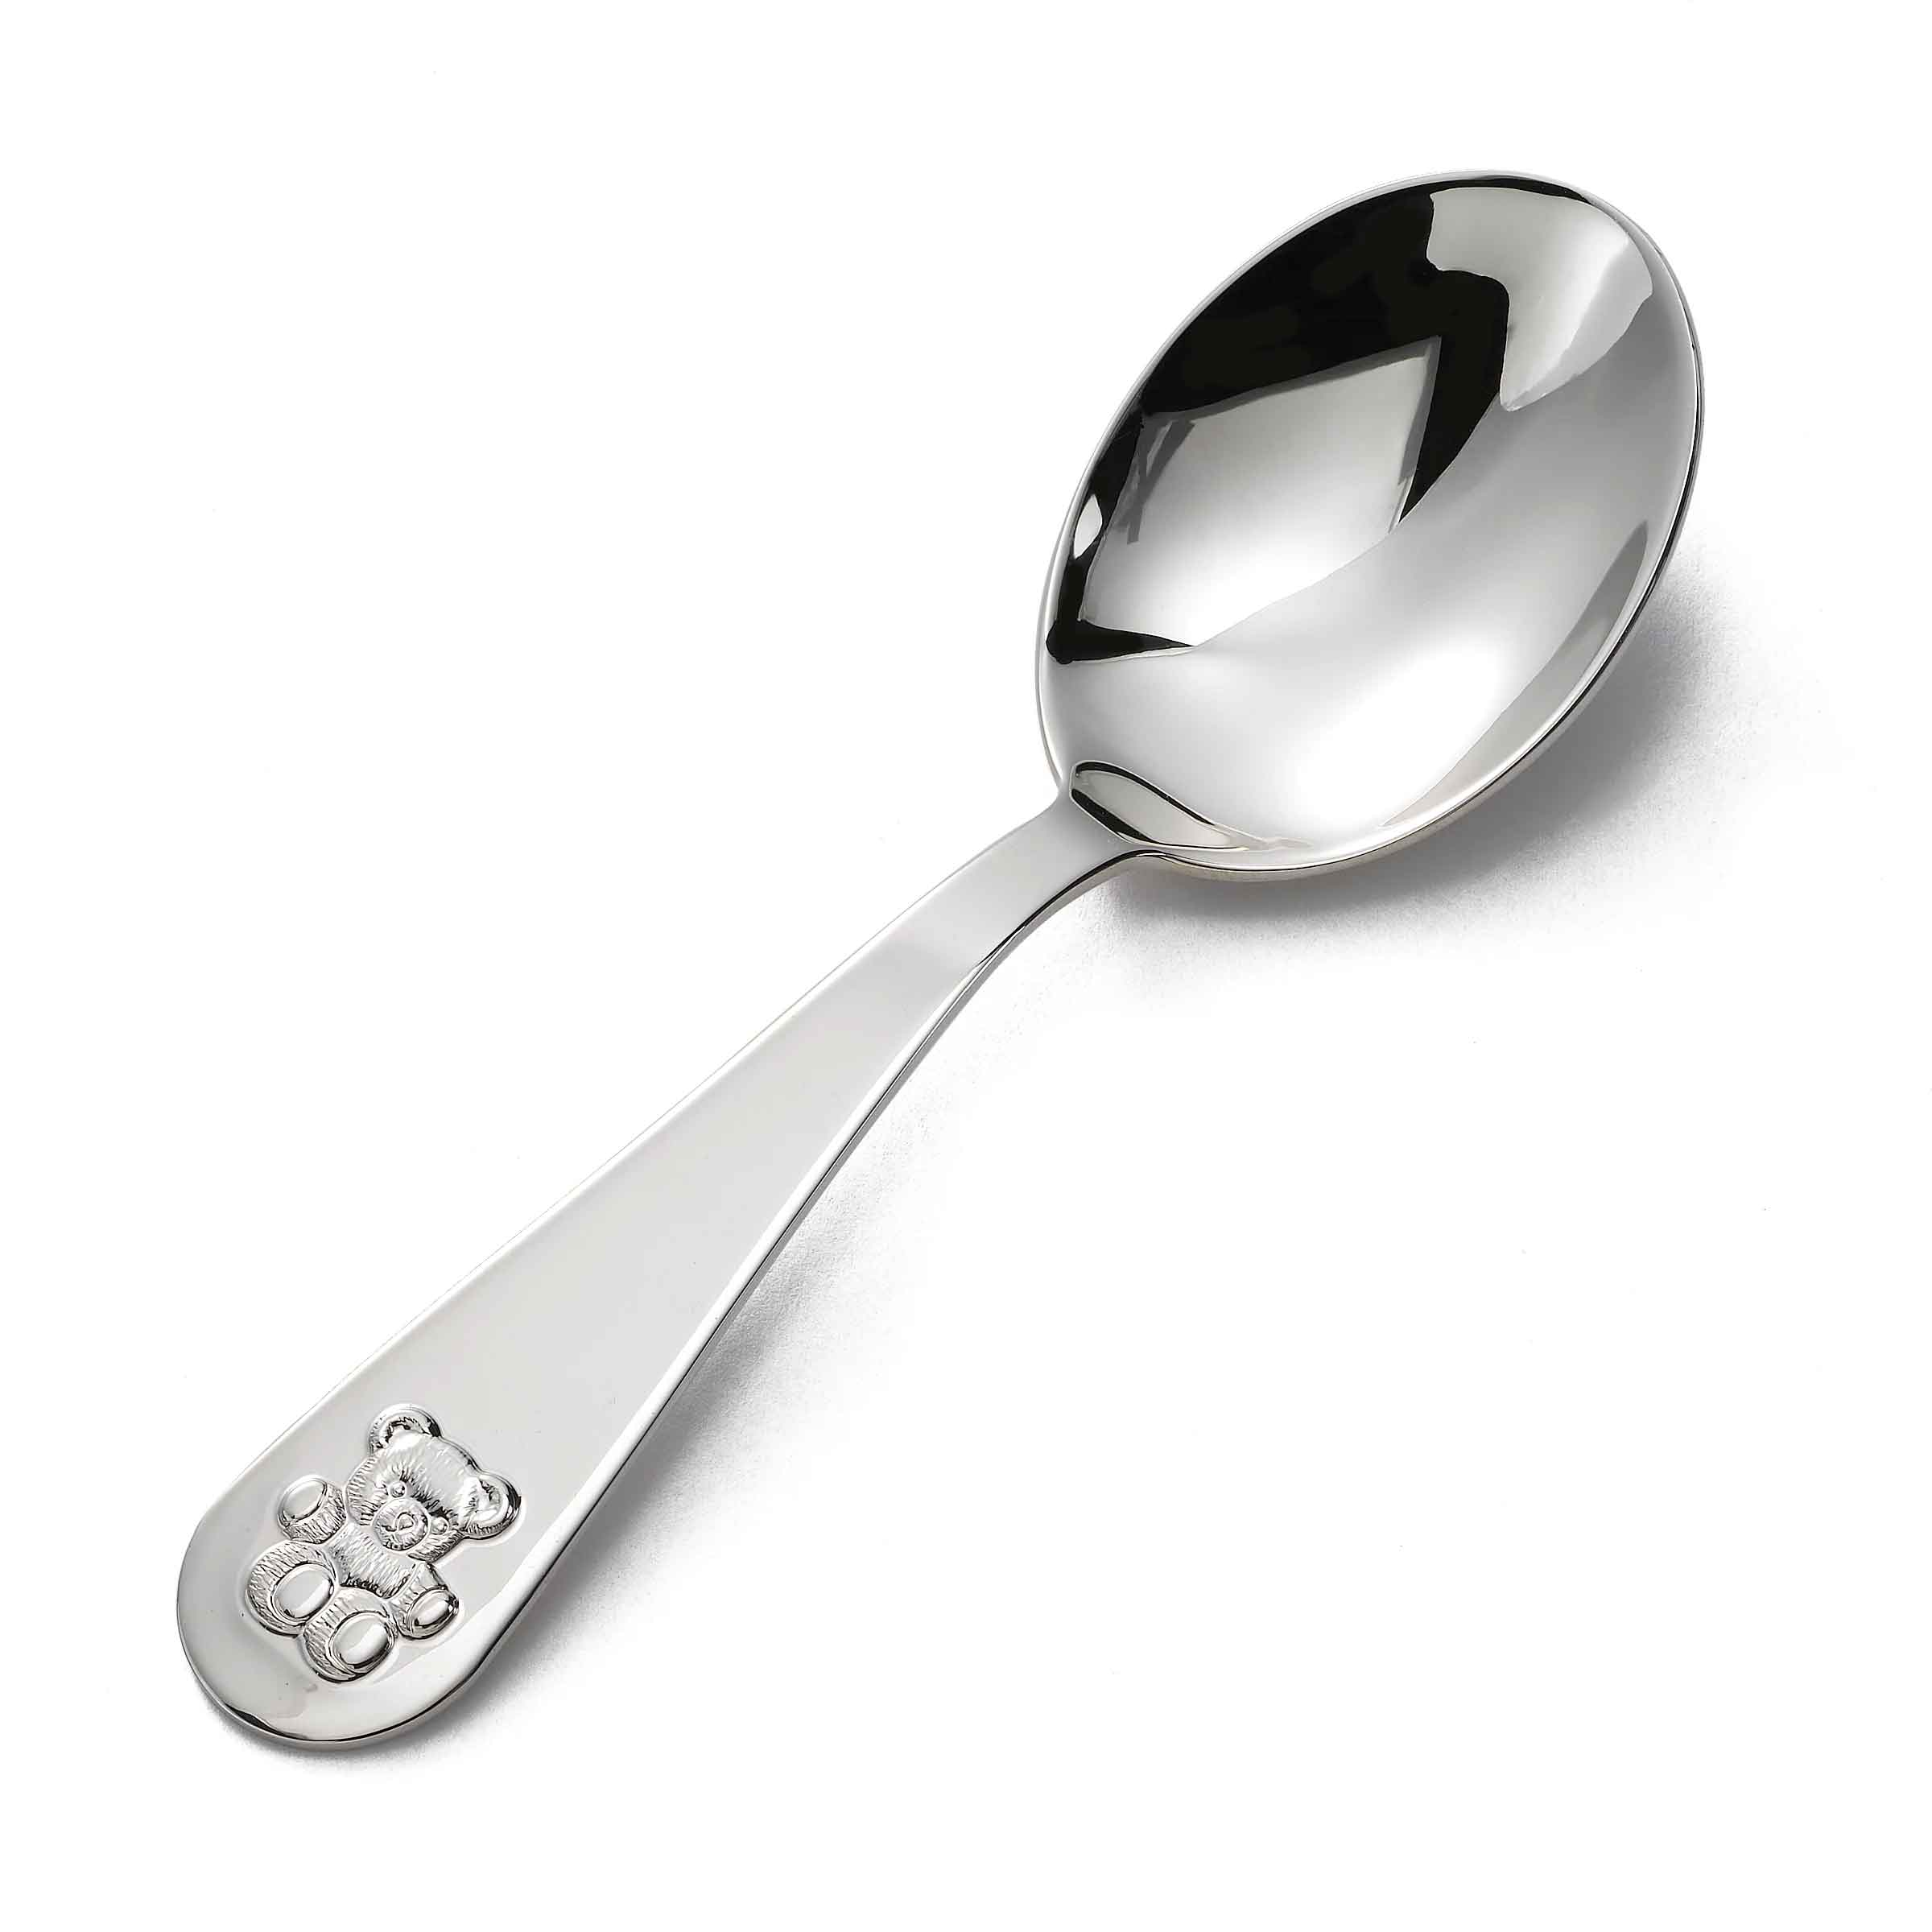 Best Baby Spoons and Toddler Utensils (Durable and Affordable!)